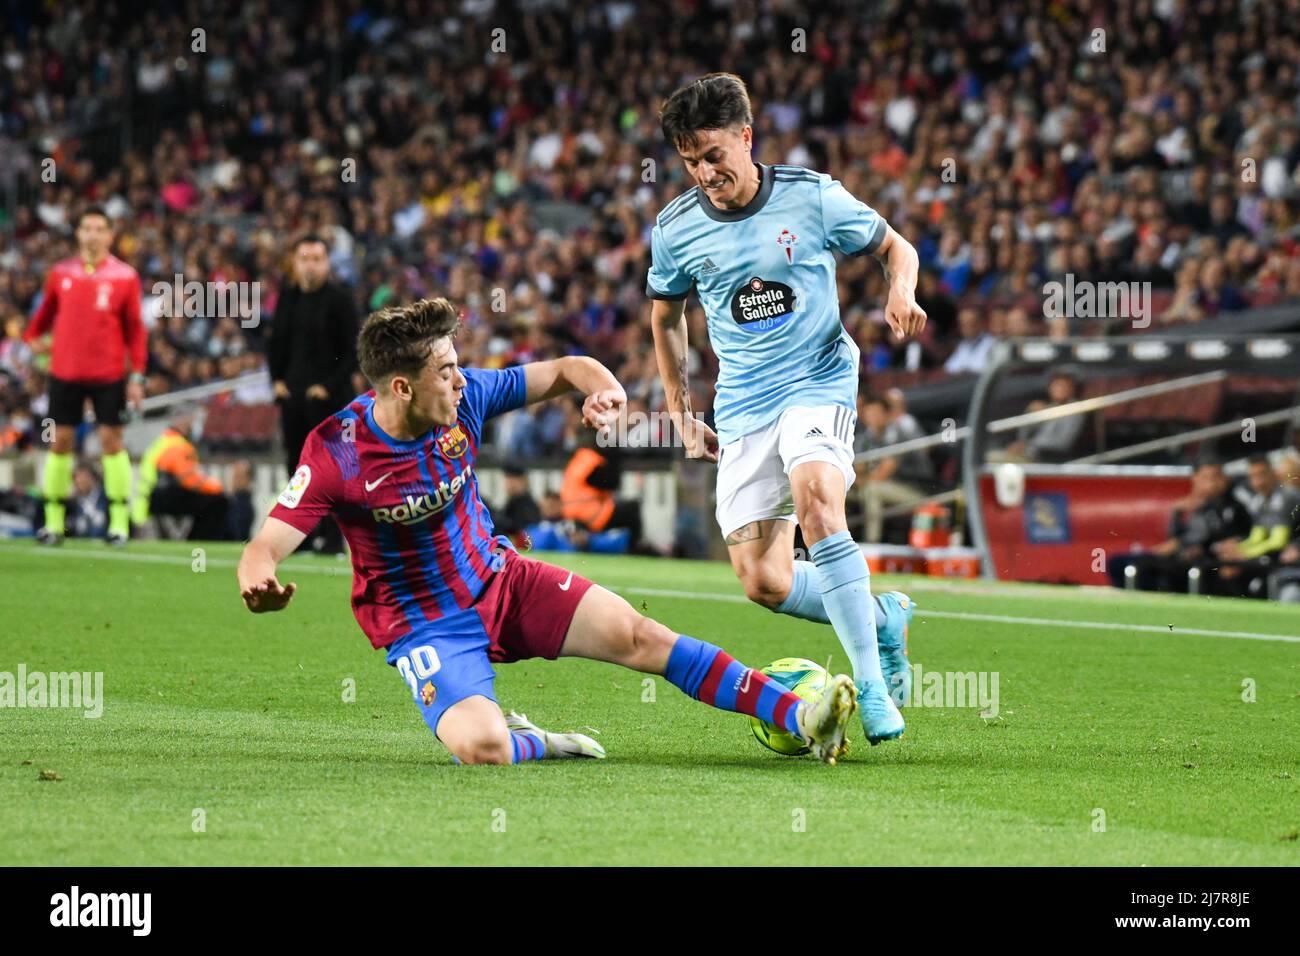 BARCELONA, SPAIN - MAY 10: Gavi of FC Barcelona fights for the ball with Franco Cervi of RC Celta de Vigo during La Liga match between FC Barcelona and RC Celta de Vigo at Camp Nou on May 10, 2022 in Barcelona, SPAIN. (Photo by Sara Aribo/PxImages) Stock Photo